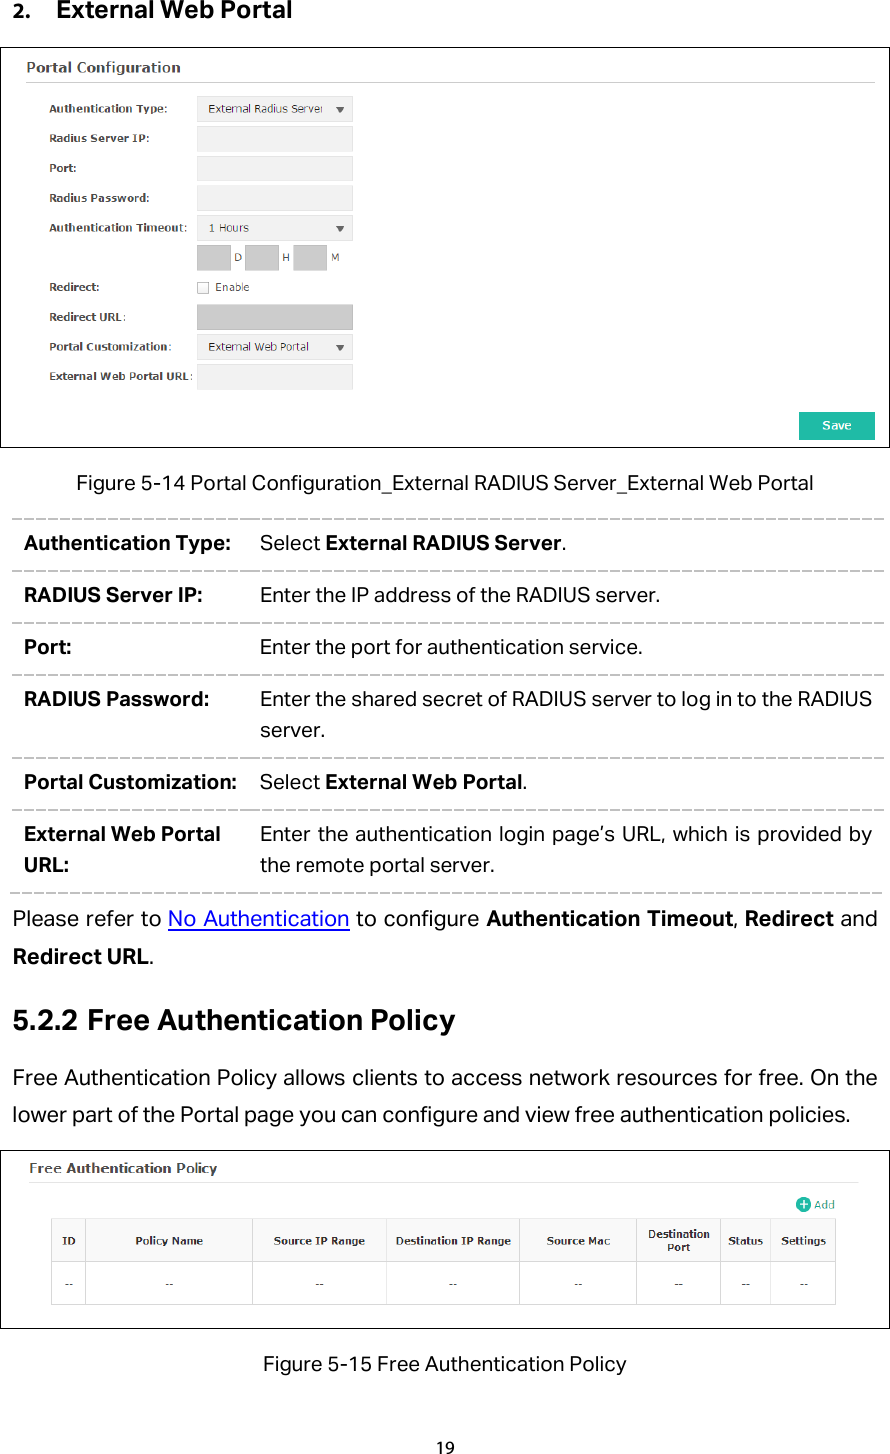 2. External Web Portal  Figure 5-14 Portal Configuration_External RADIUS Server_External Web Portal Authentication Type:  Select External RADIUS Server. RADIUS Server IP:  Enter the IP address of the RADIUS server. Port:  Enter the port for authentication service. RADIUS Password:  Enter the shared secret of RADIUS server to log in to the RADIUS server. Portal Customization:  Select External Web Portal. External Web Portal URL: Enter the authentication login page’s URL, which is provided by the remote portal server. Please refer to No Authentication to configure Authentication Timeout, Redirect and Redirect URL. 5.2.2 Free Authentication Policy Free Authentication Policy allows clients to access network resources for free. On the lower part of the Portal page you can configure and view free authentication policies.    Figure 5-15 Free Authentication Policy 19  